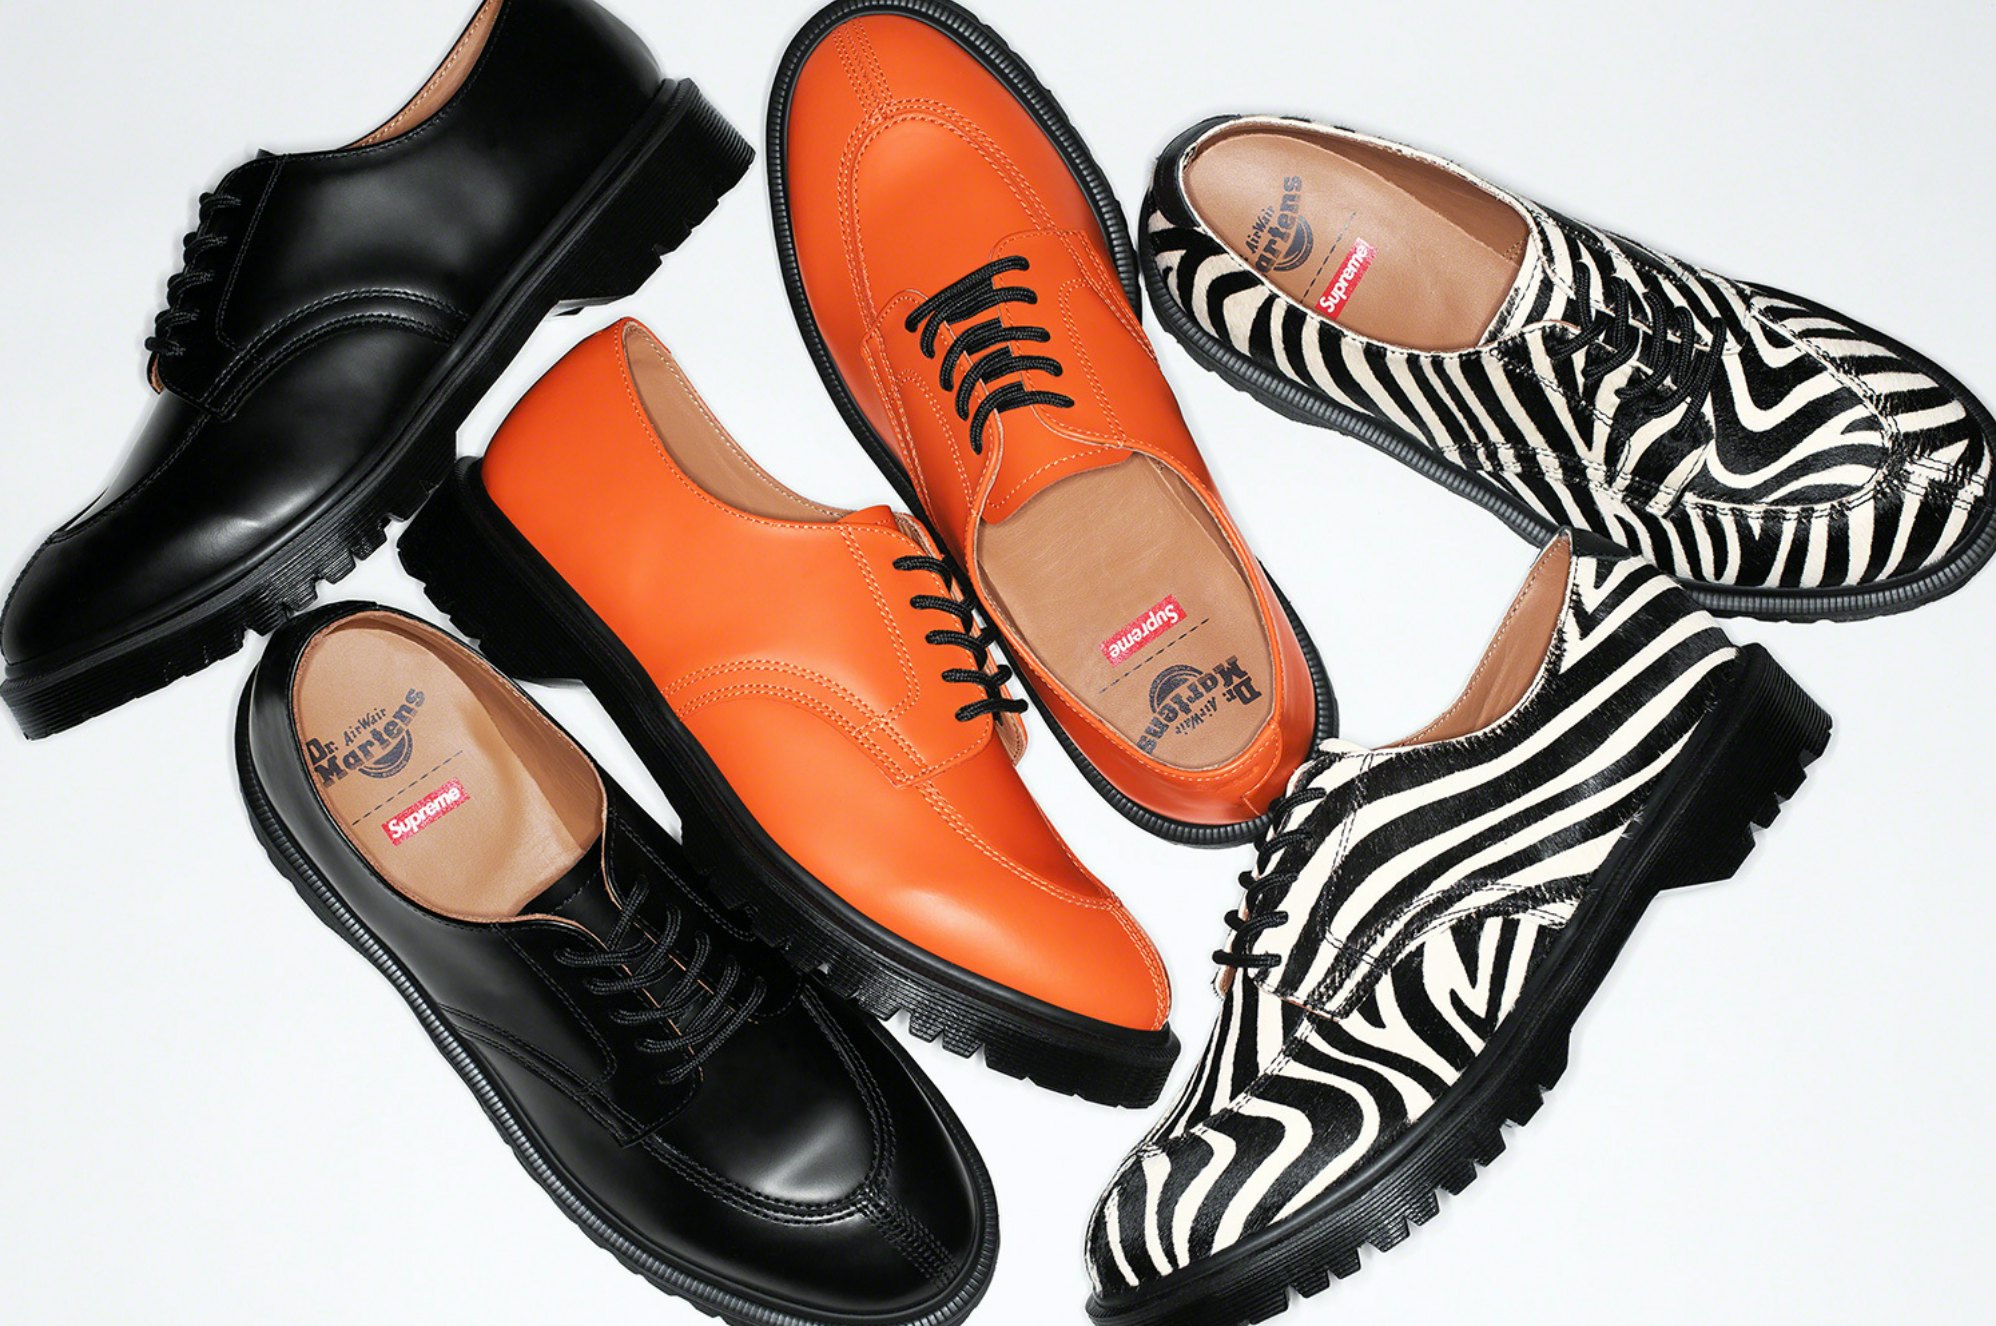 Supreme and Dr. Martens mix funk and punk to create the perfect summer shoe